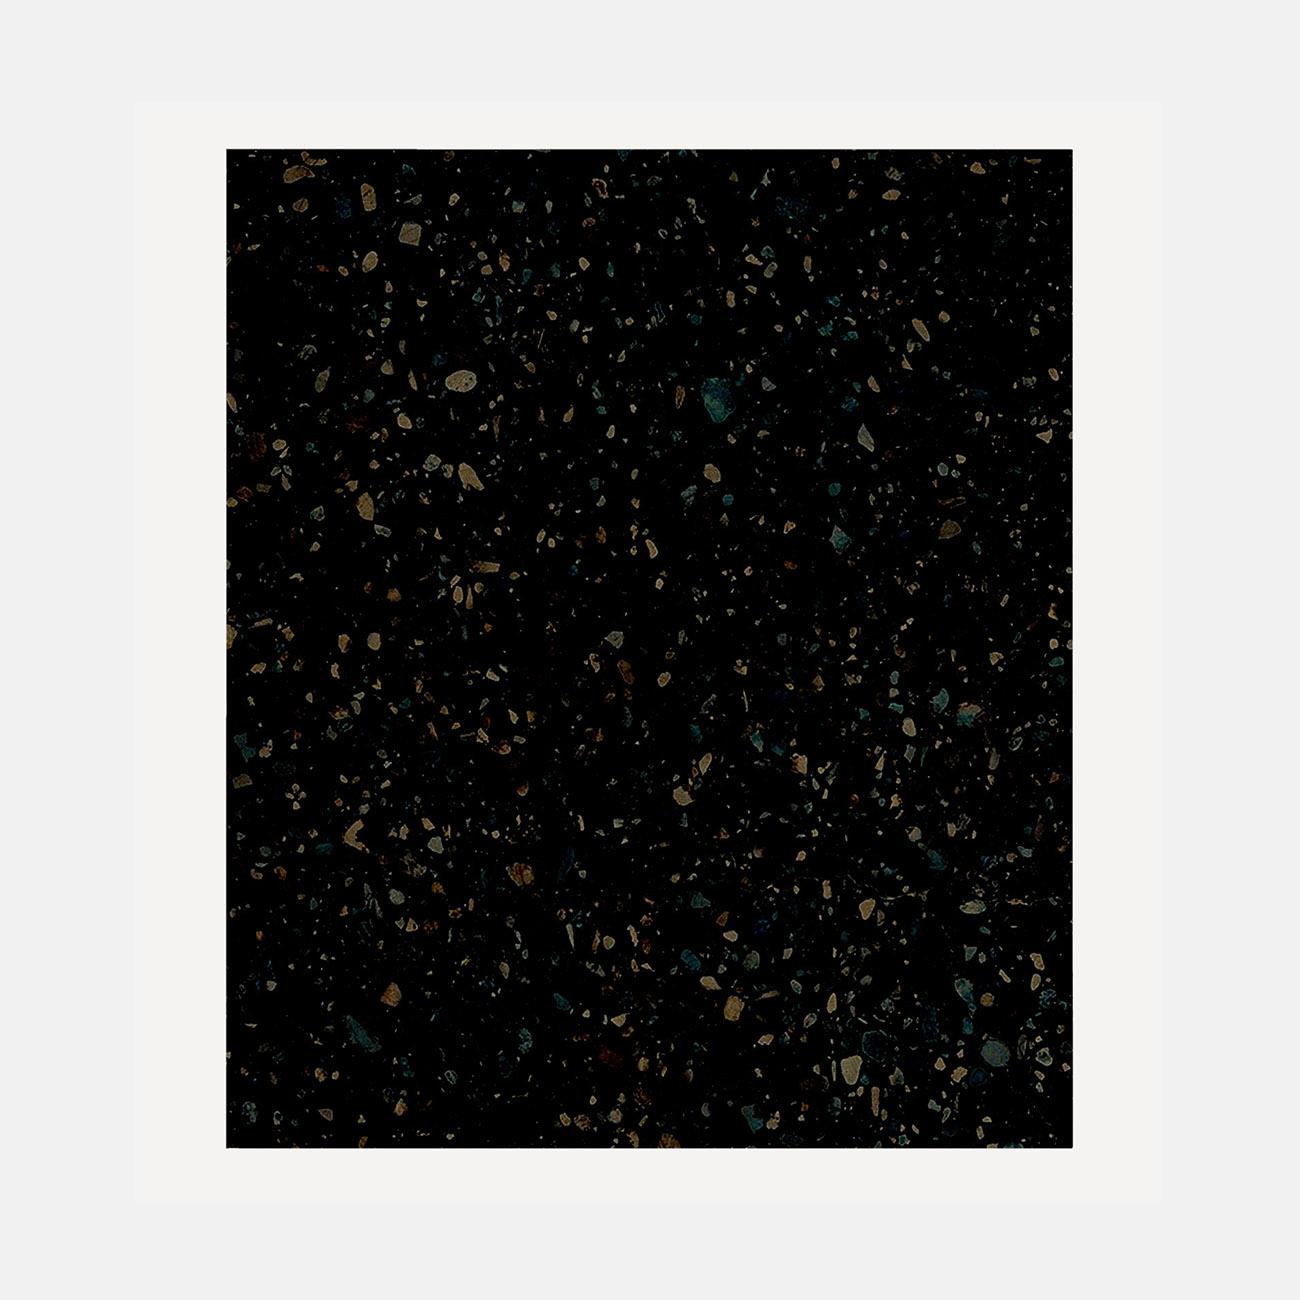 Terrazzo De Noir Rug by Atelier Bowy C.D.
Dimensions: W 243 x L 300 cm.
Materials: Wool, silk.

Available in D170, D200, D240, W140 x L220, W200 x L200, W170 x L240, W210 x L300, W243 x L300 cm.

Atelier Bowy C.D. is dedicated to crafting